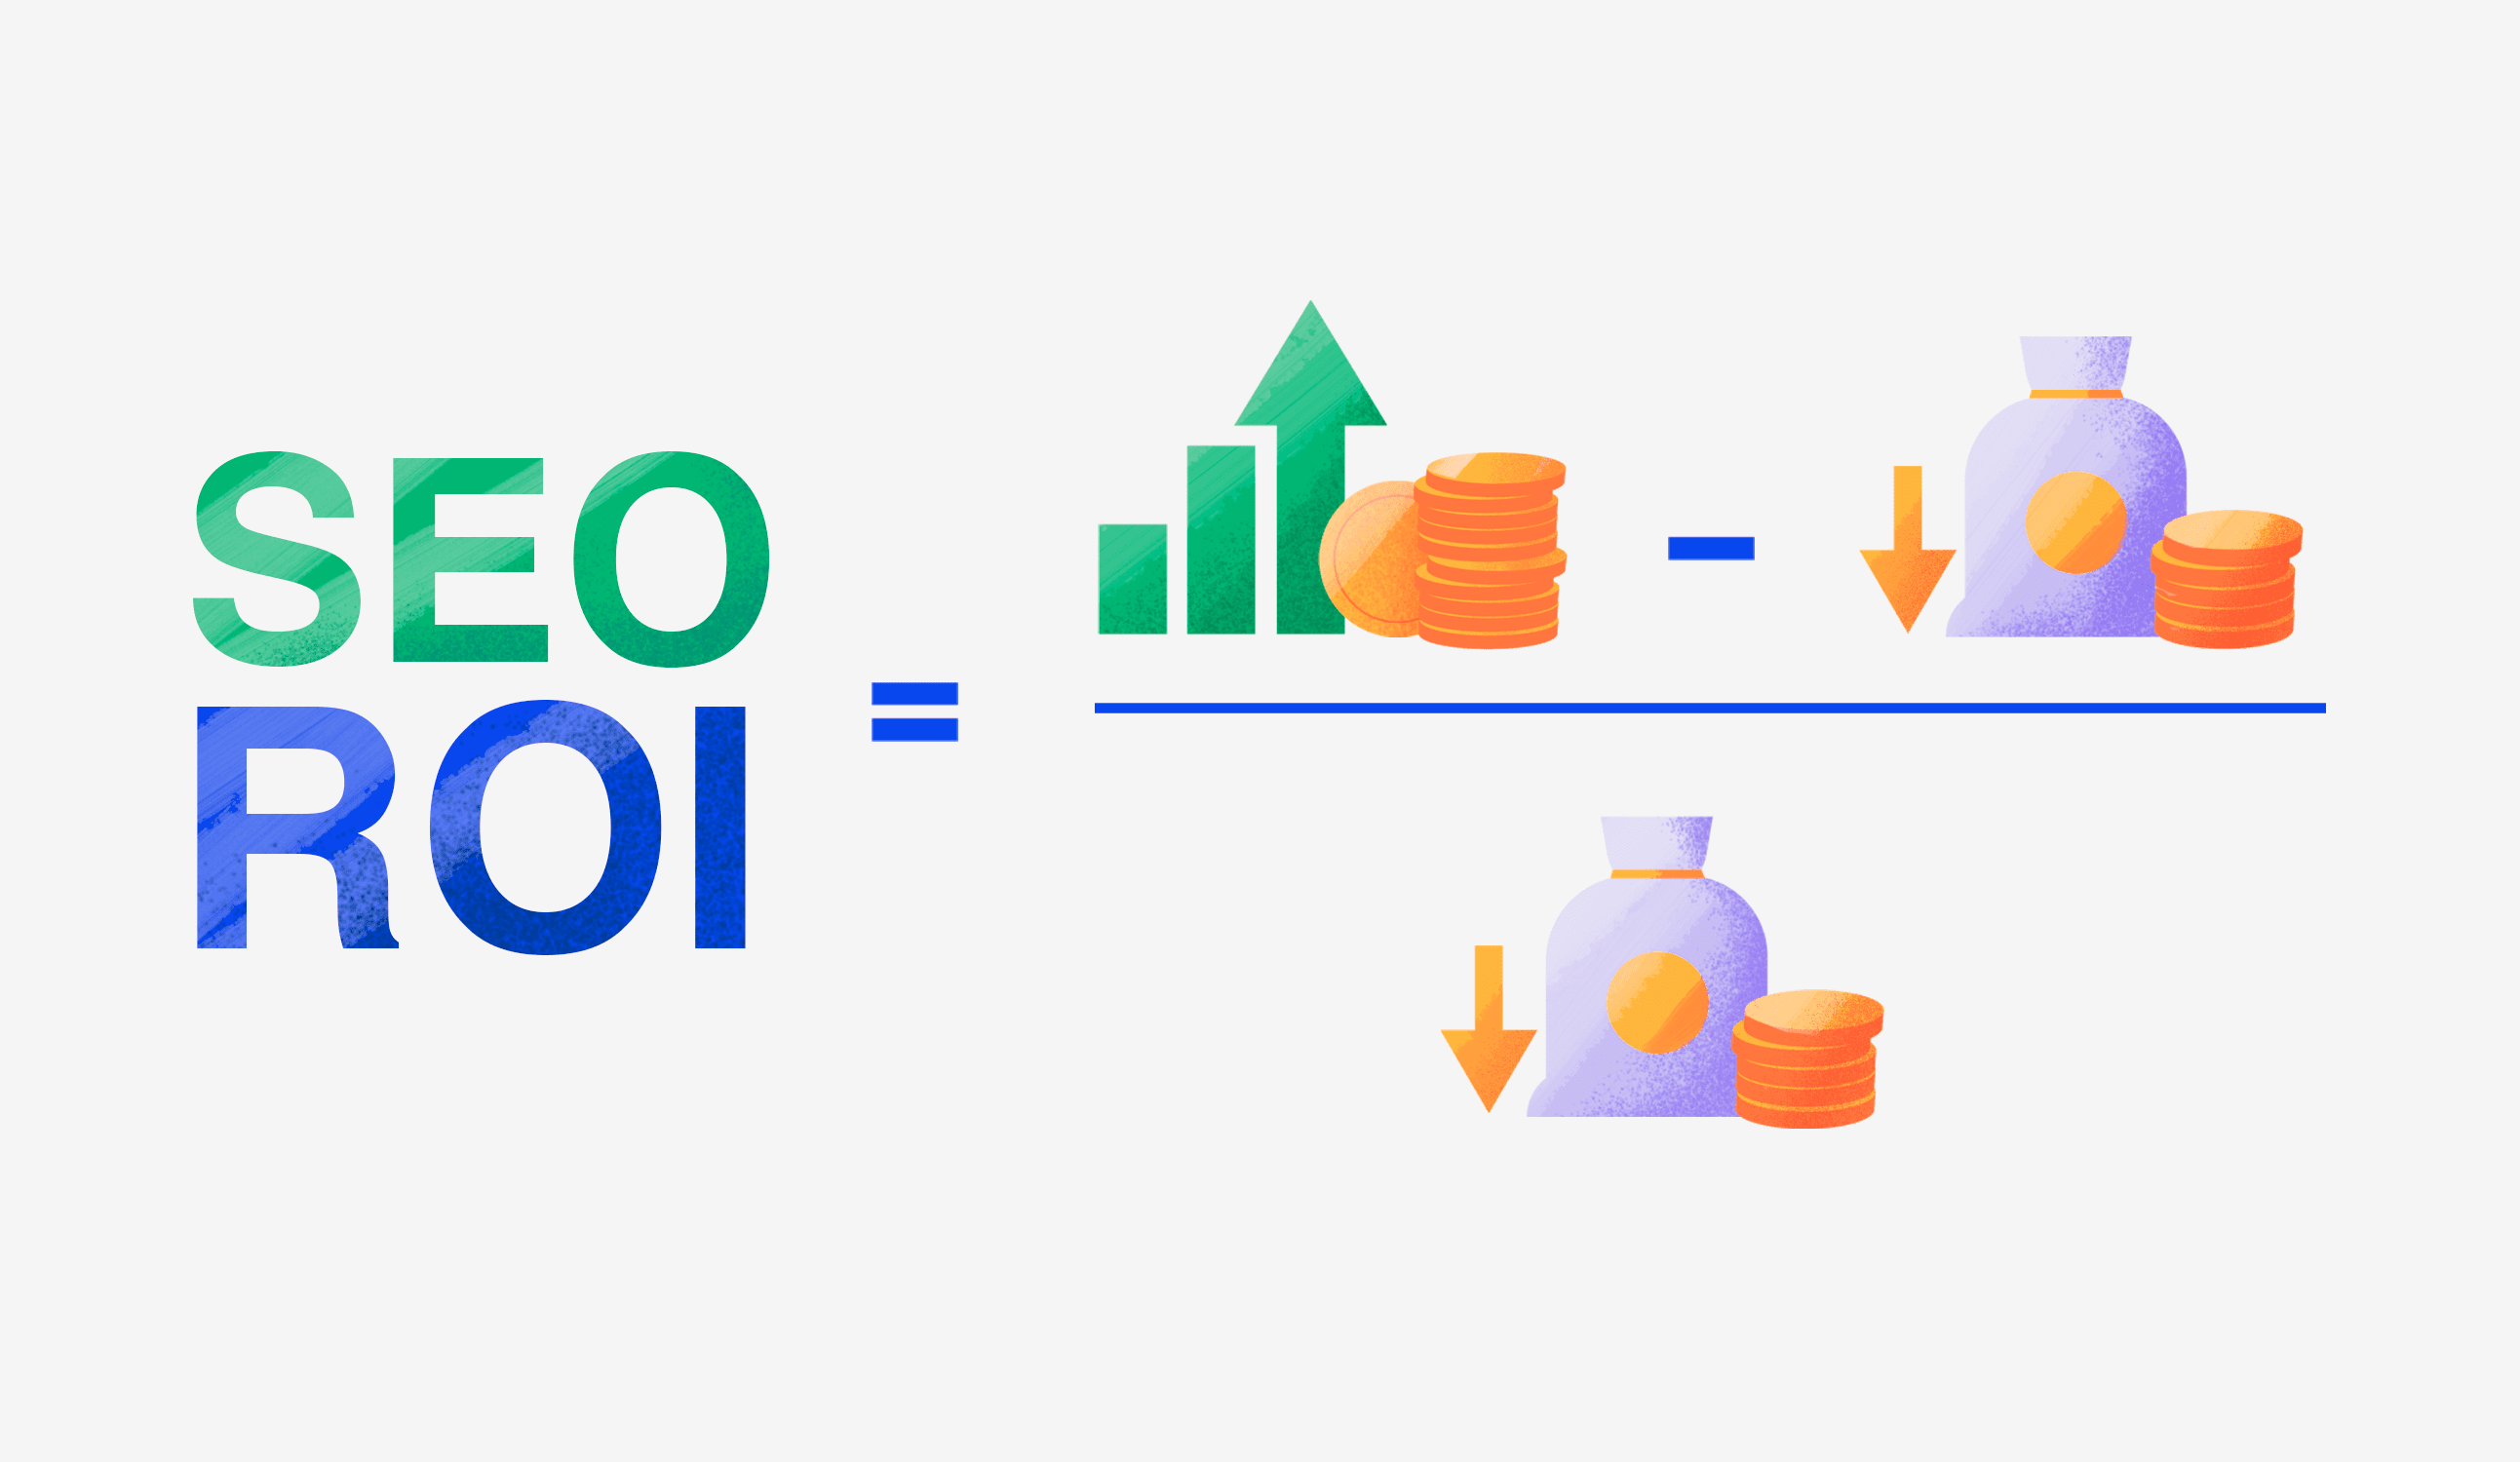 Formula for calculating your SEO ROI